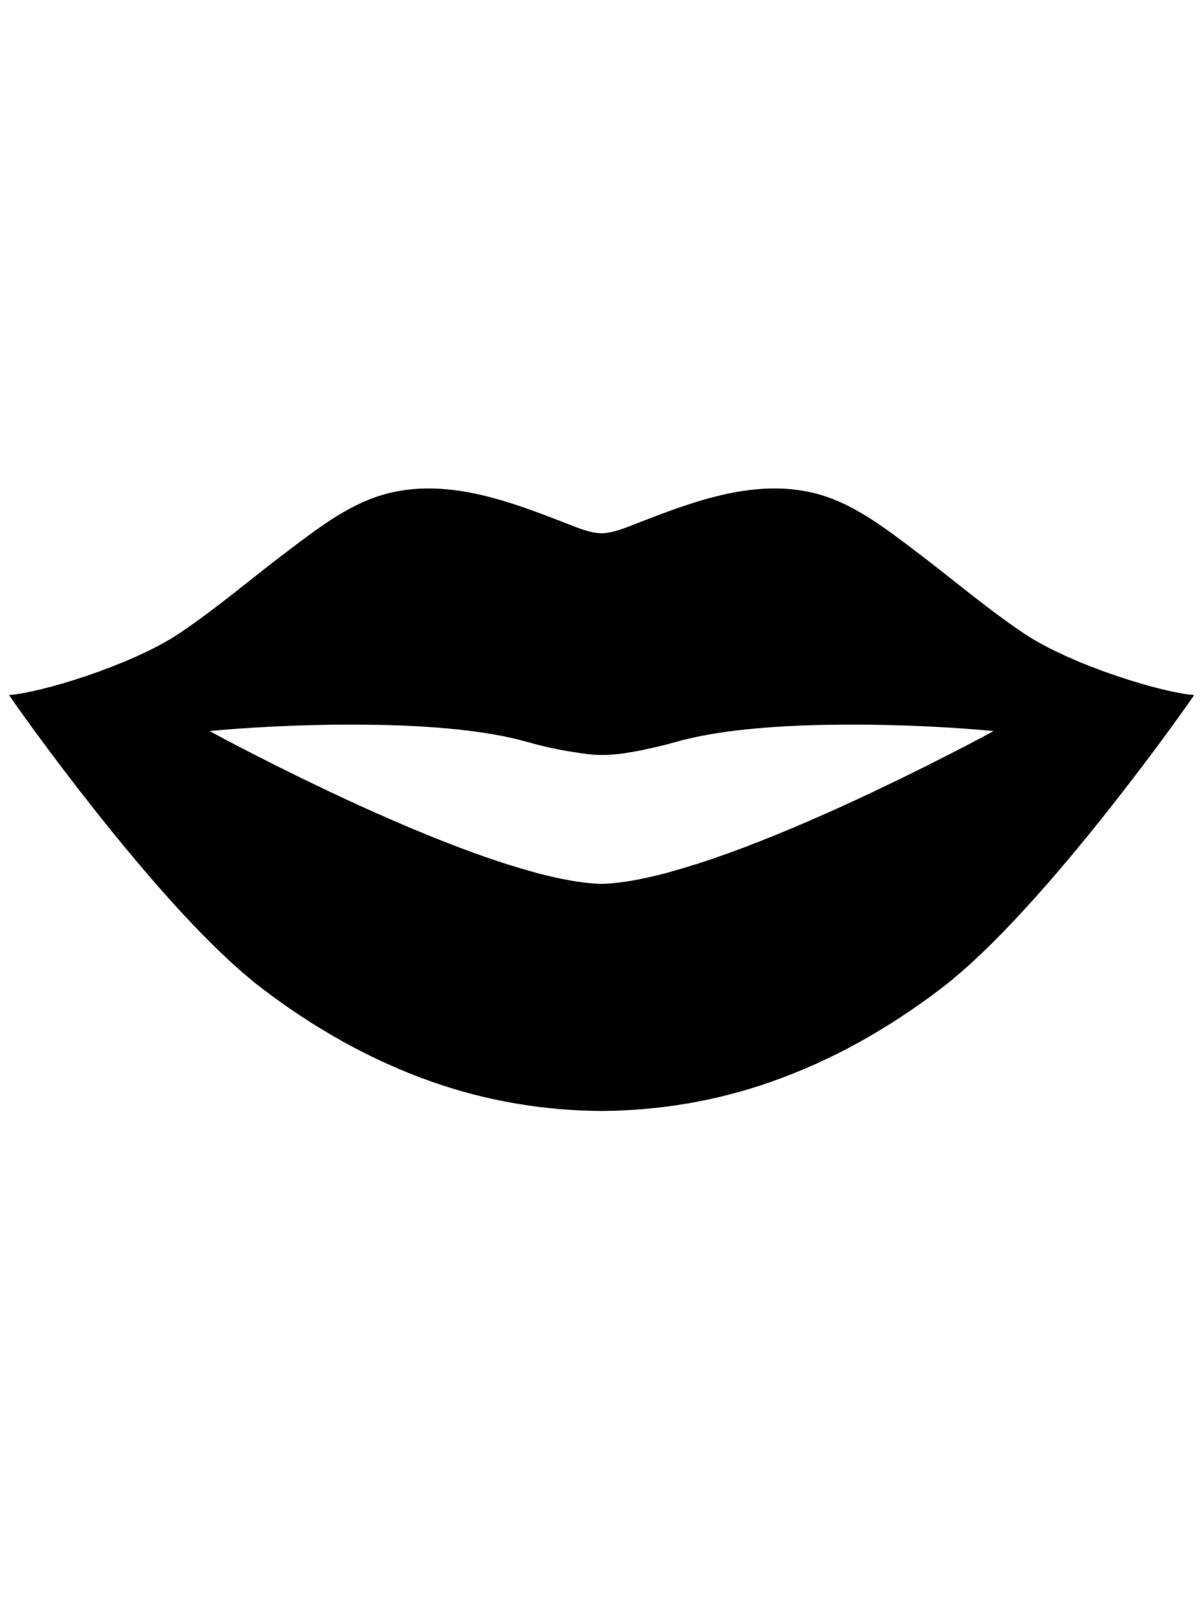 Free printable Lips stencils and templates